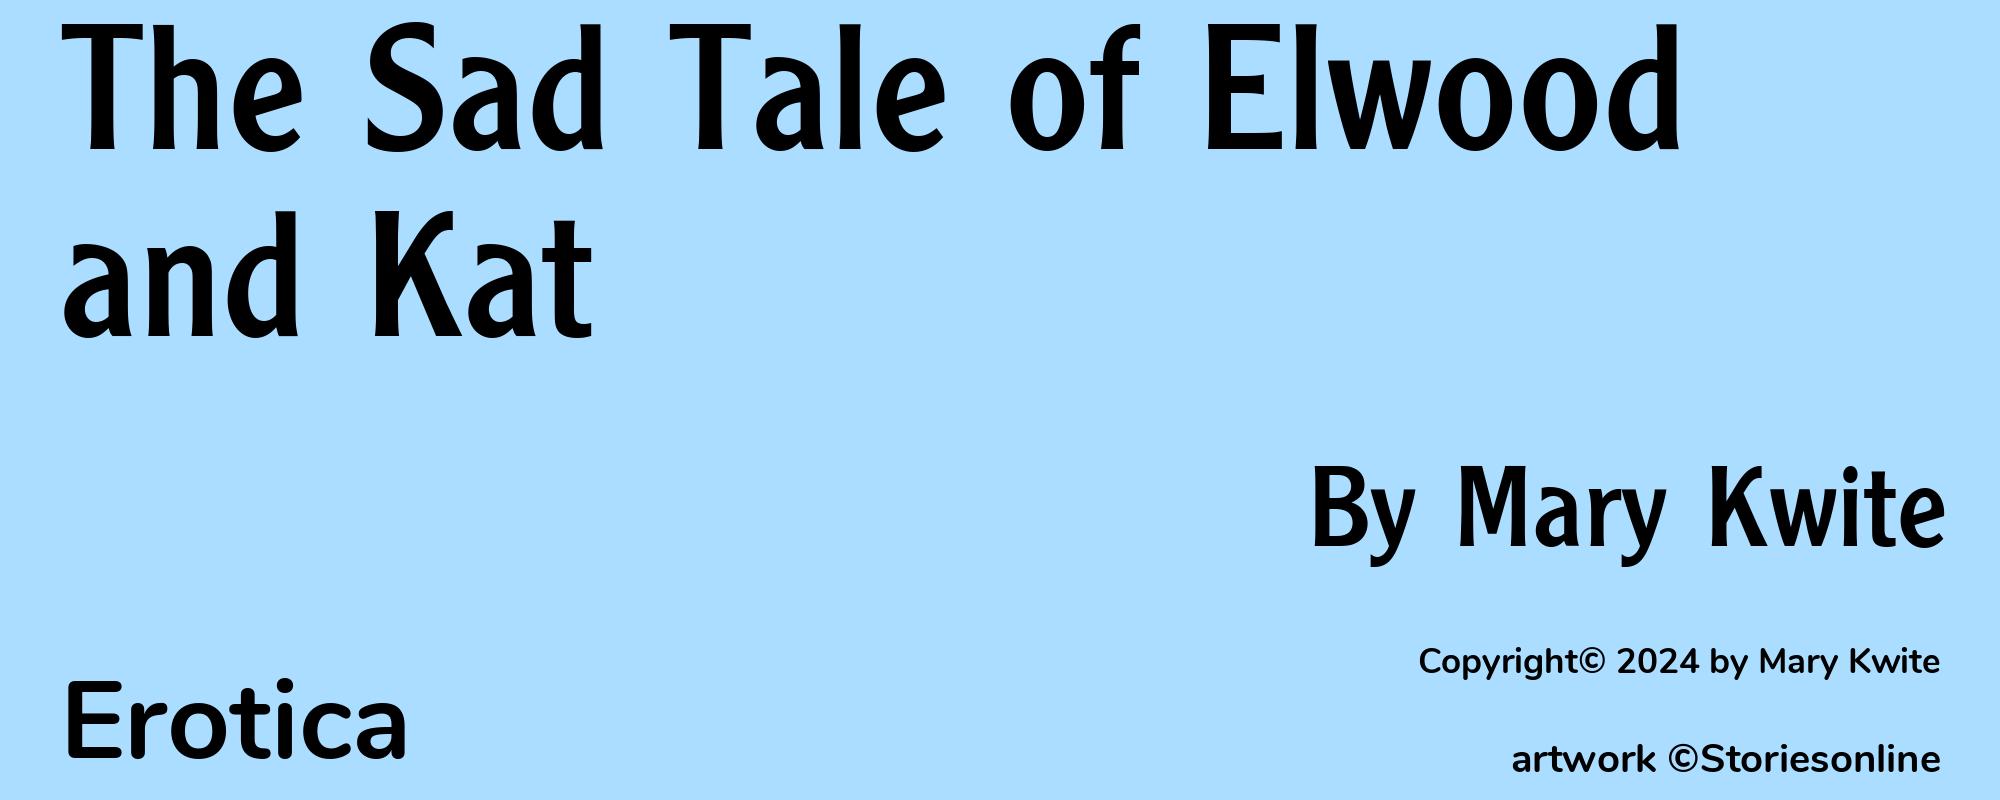 The Sad Tale of Elwood and Kat - Cover